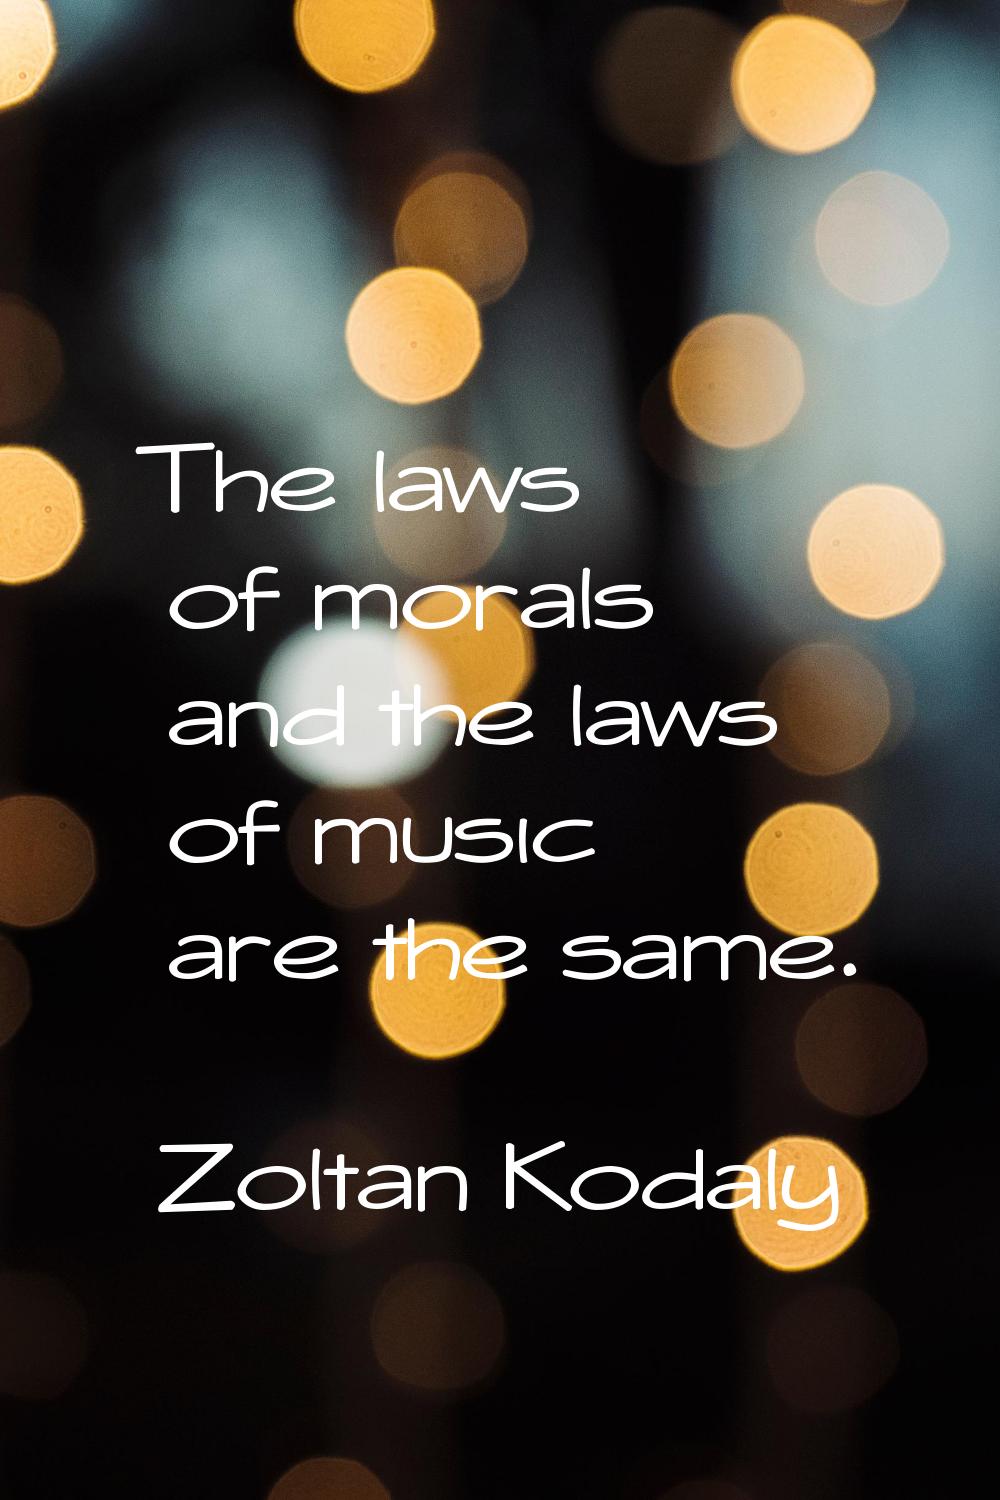 The laws of morals and the laws of music are the same.